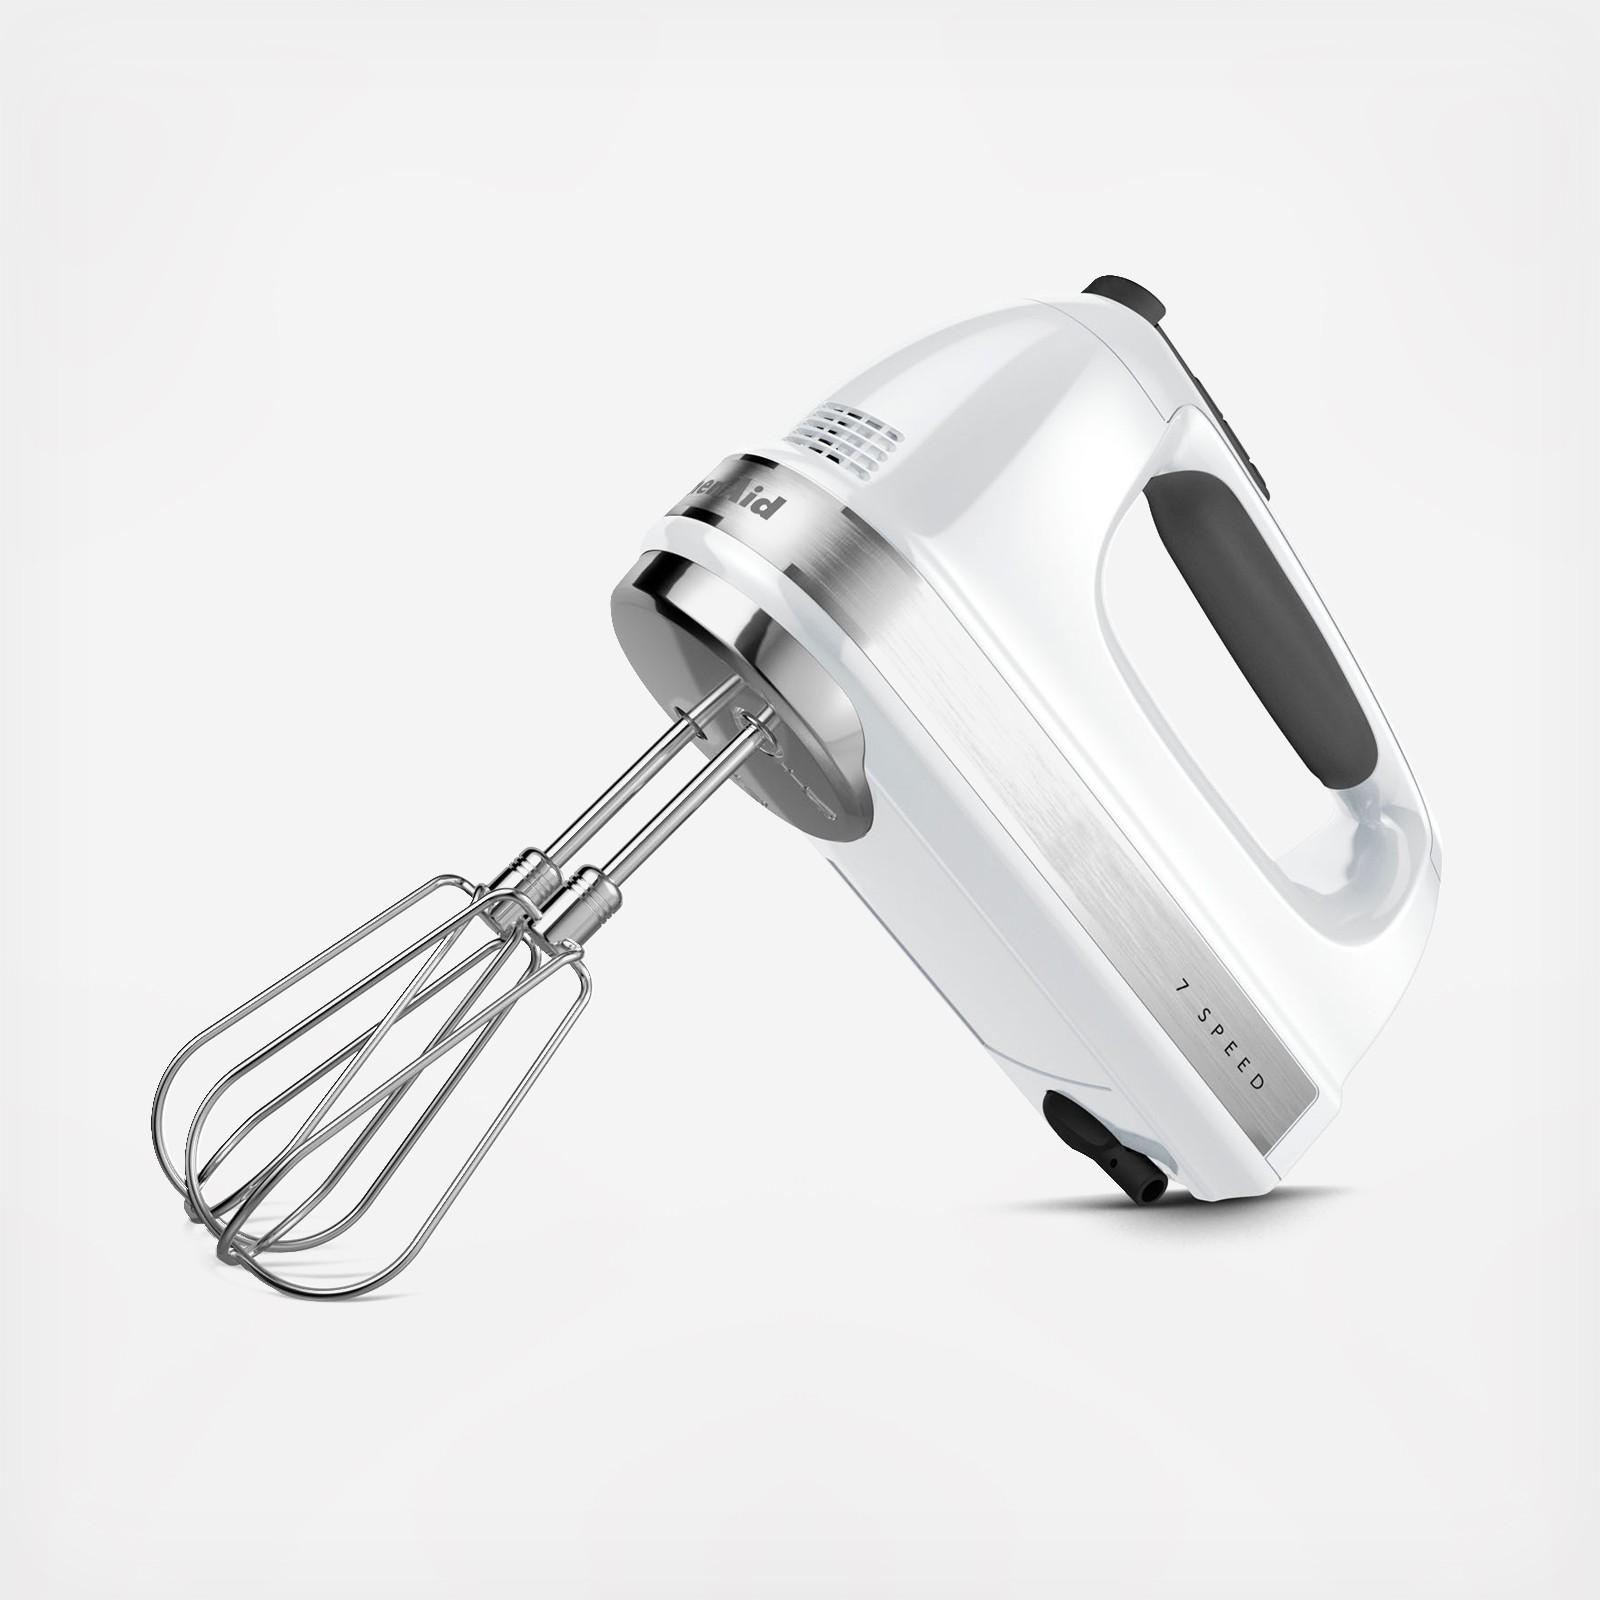 Electric Hand Mixers with Digital Speed Controls: 7 Speeds, Multiple Colors  (KHM7210), KitchenAid